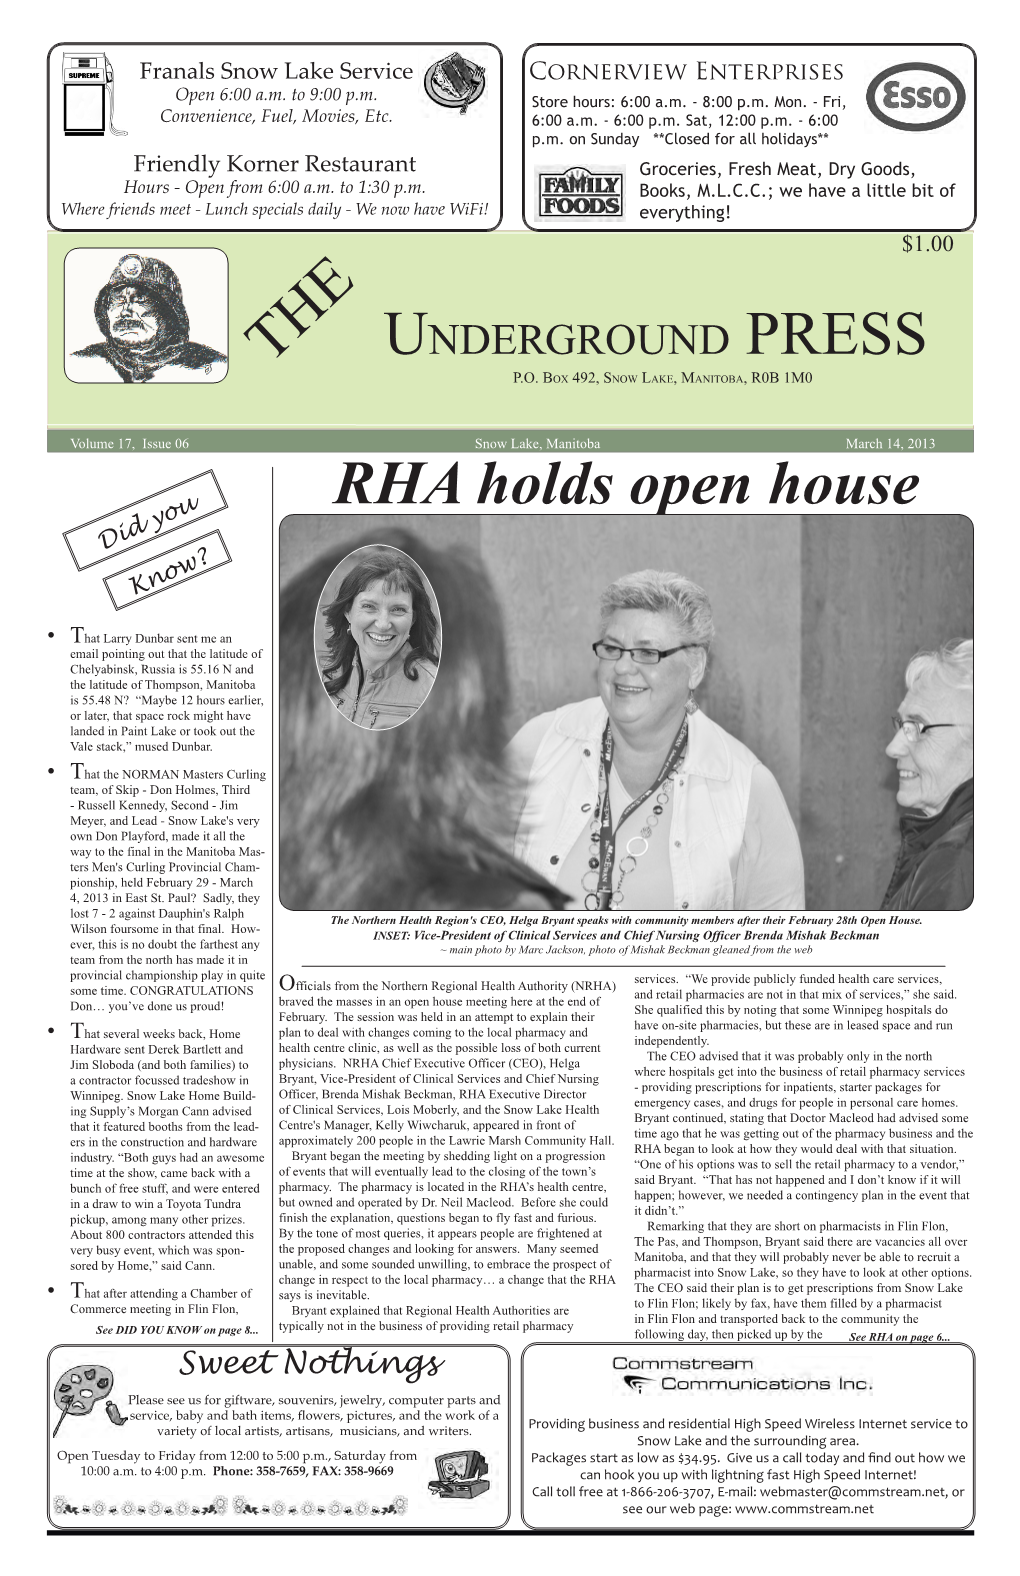 RHA Holds Open House Did You